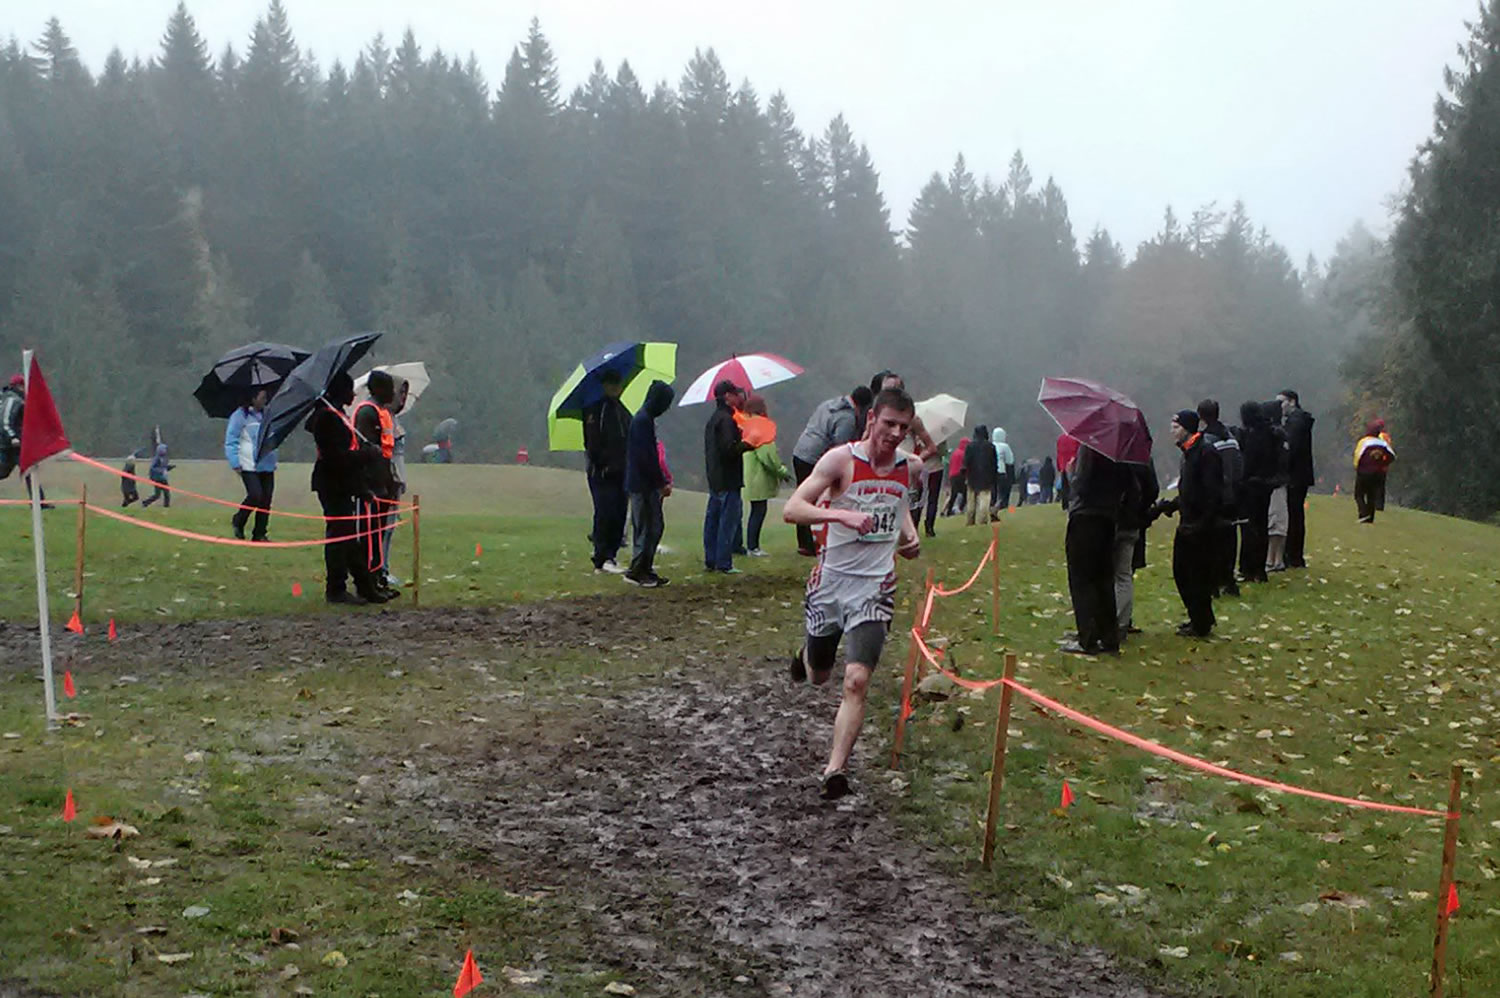 Washougal senior Sean Eustis earned second place in the 2A boys district cross country race Saturday, at Evergreen State College.